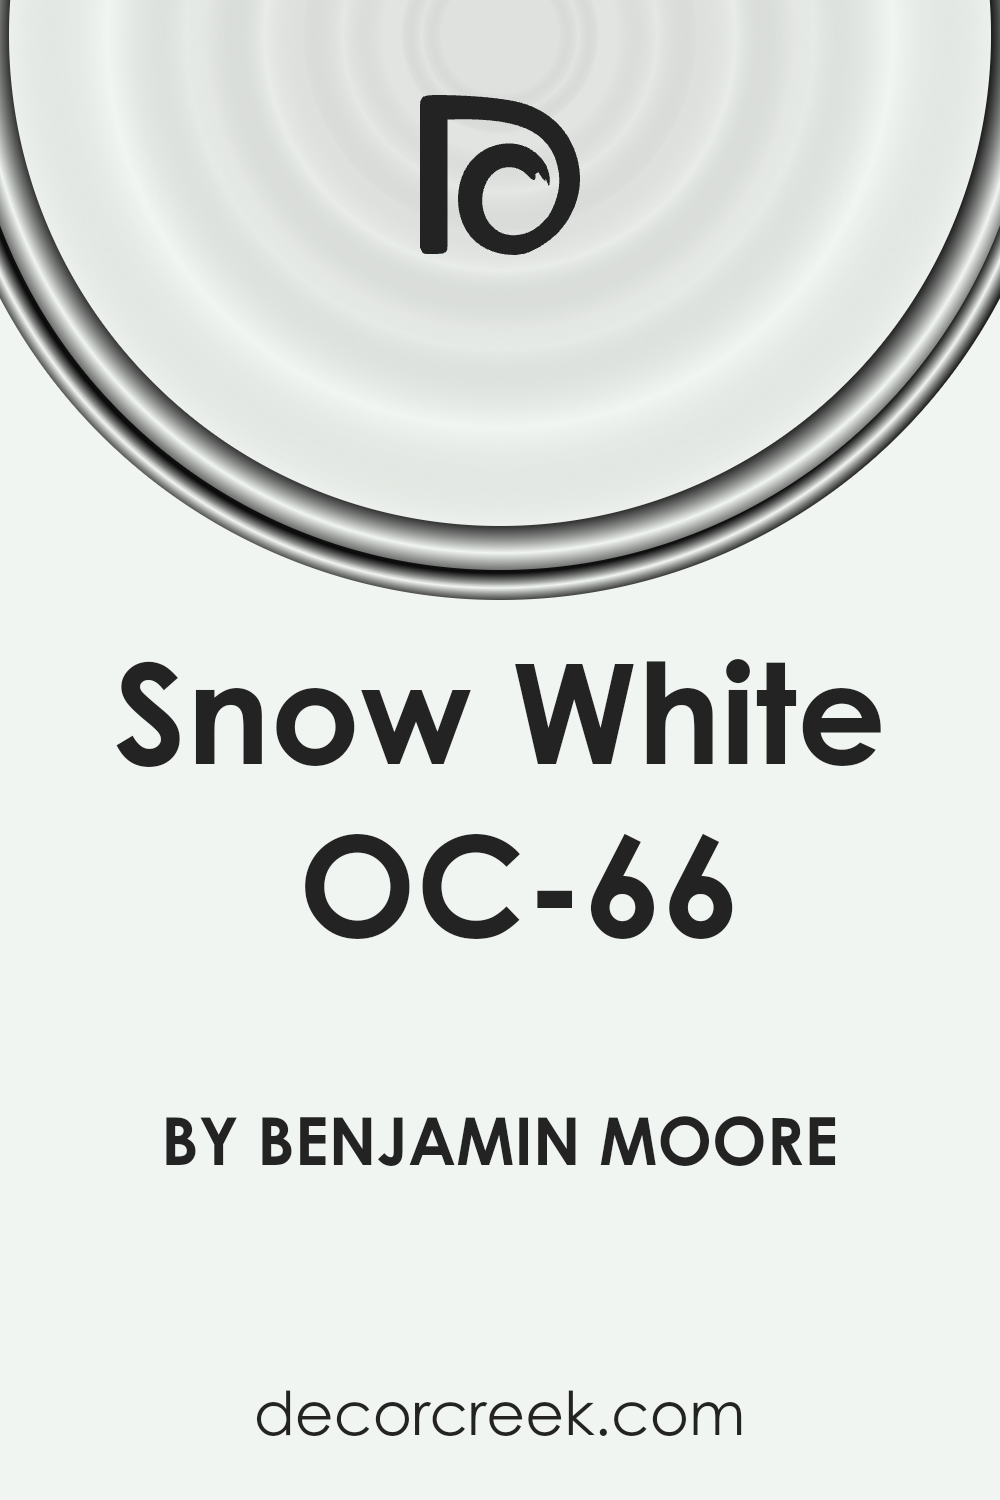 snow_white_oc_66_paint_color_by_benjamin_moore